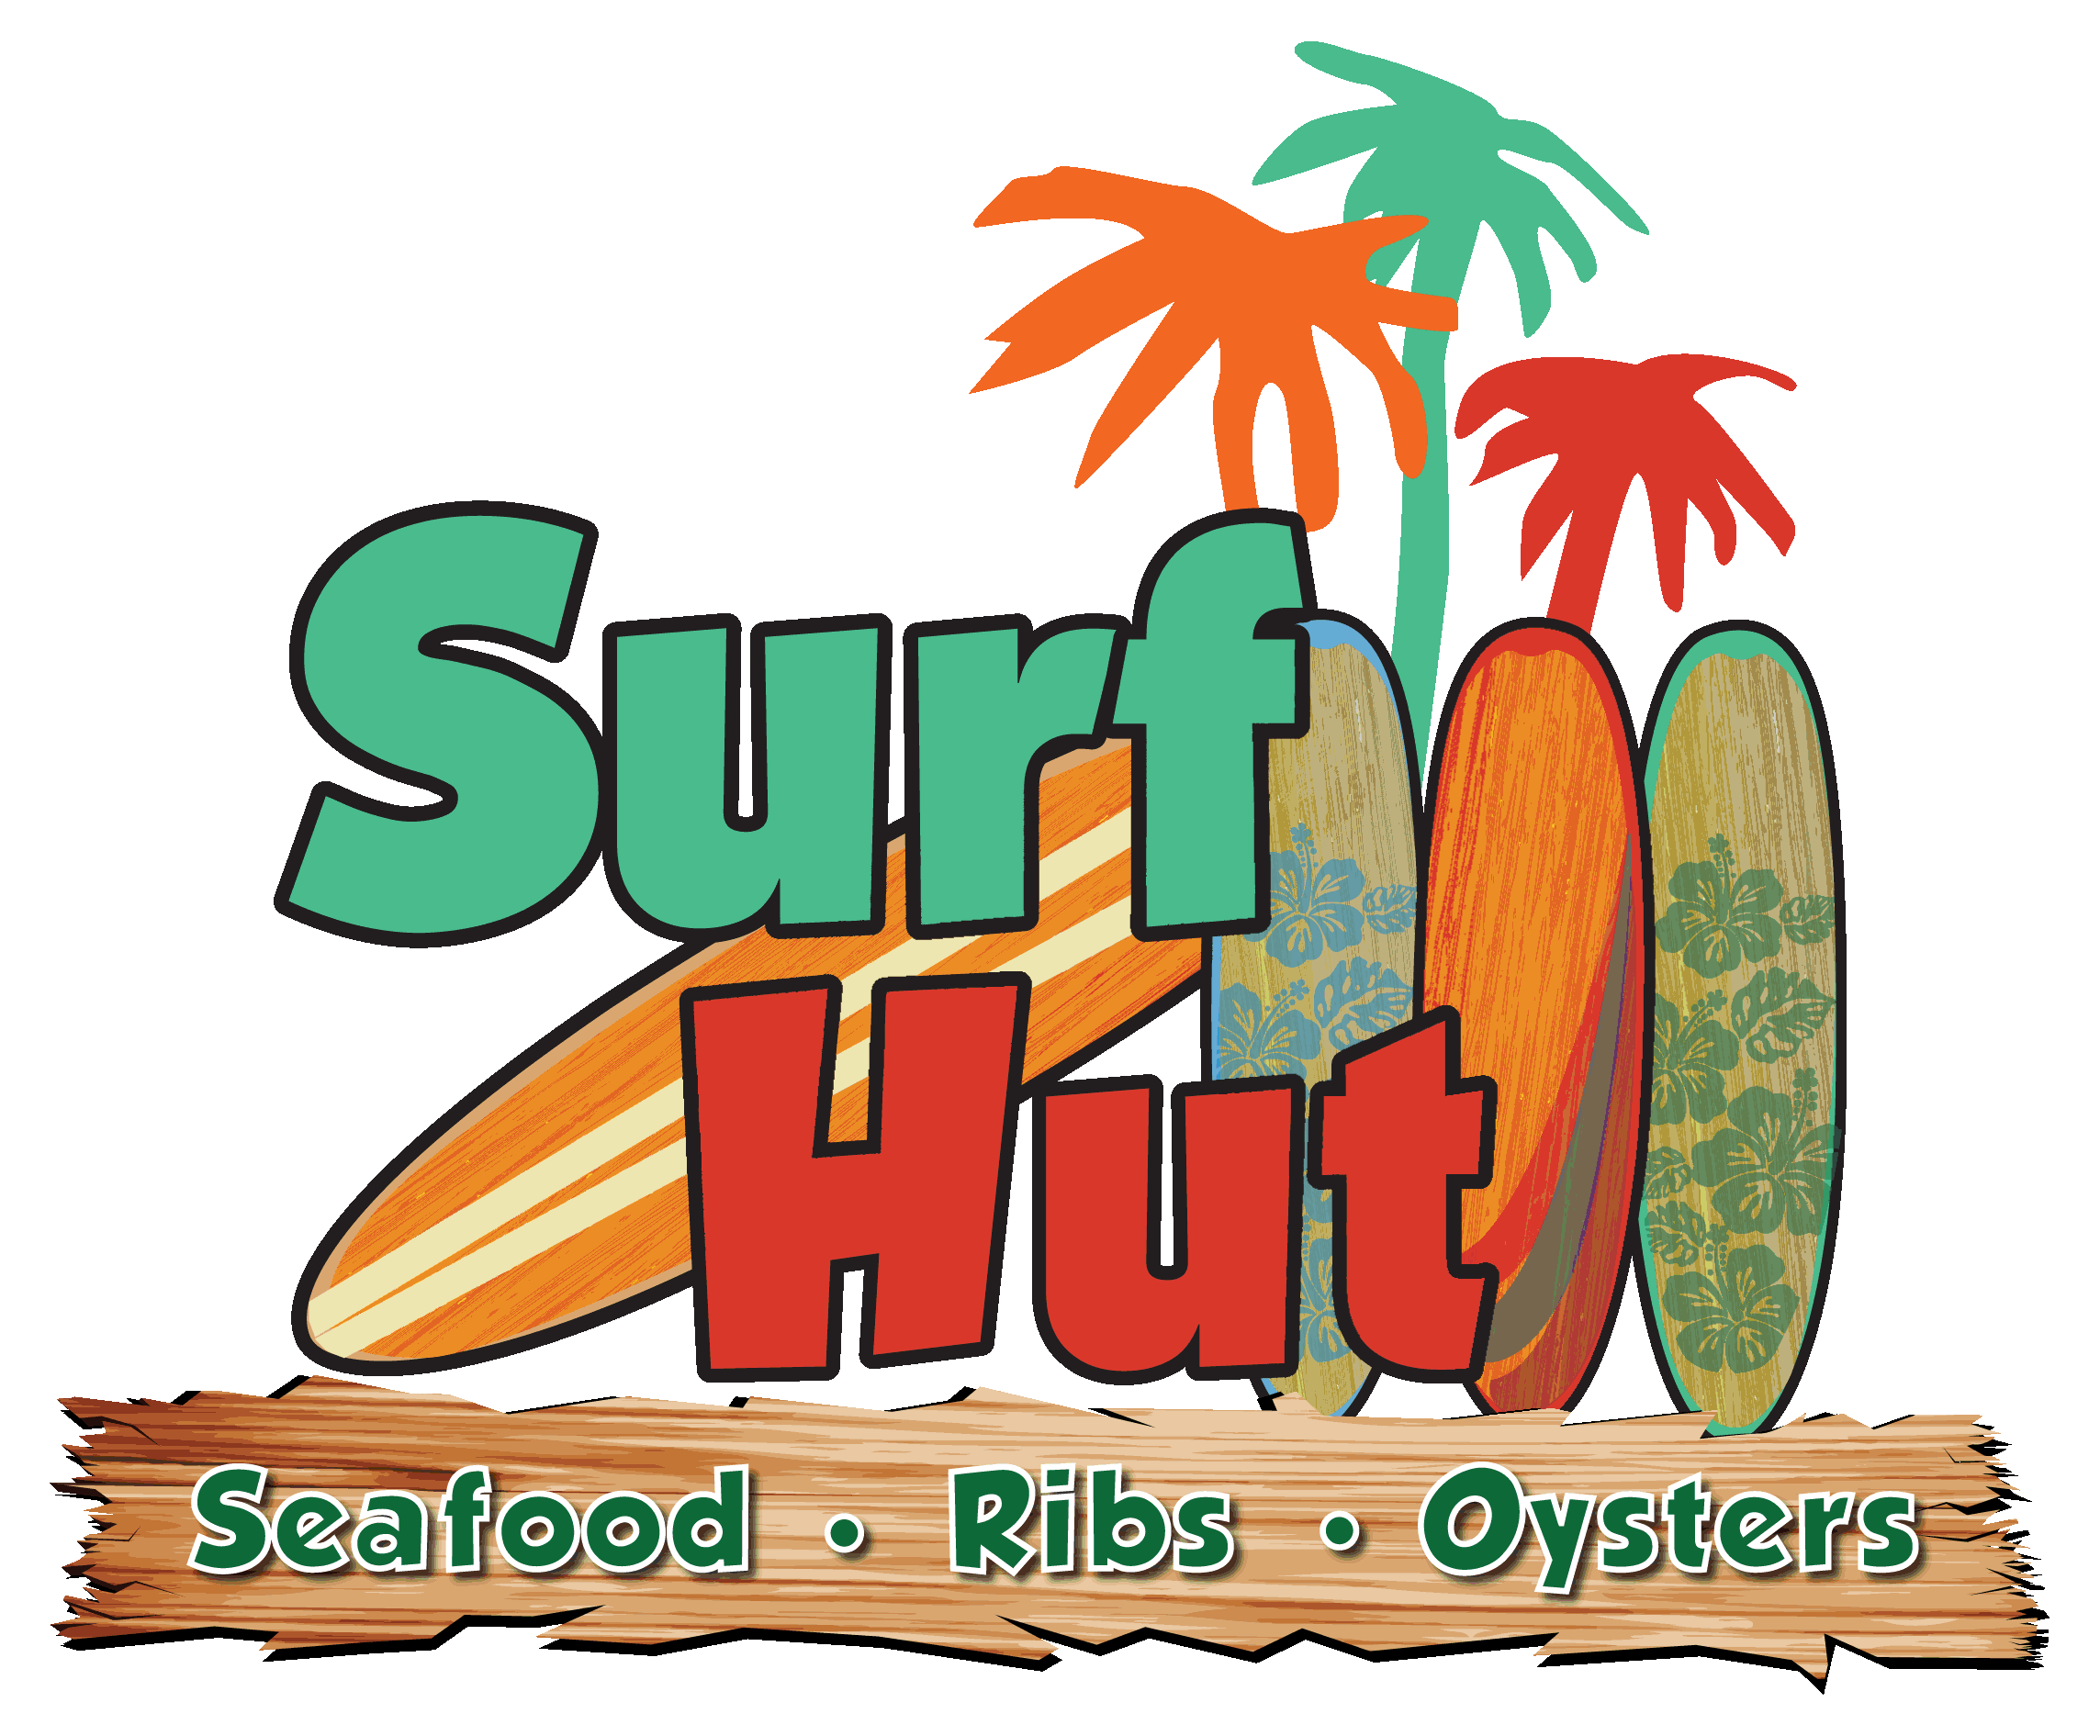 Gulf front restaurant specializing in seafood, oysters and ribs as well as family fun a great times! 
#SurfHutDestin